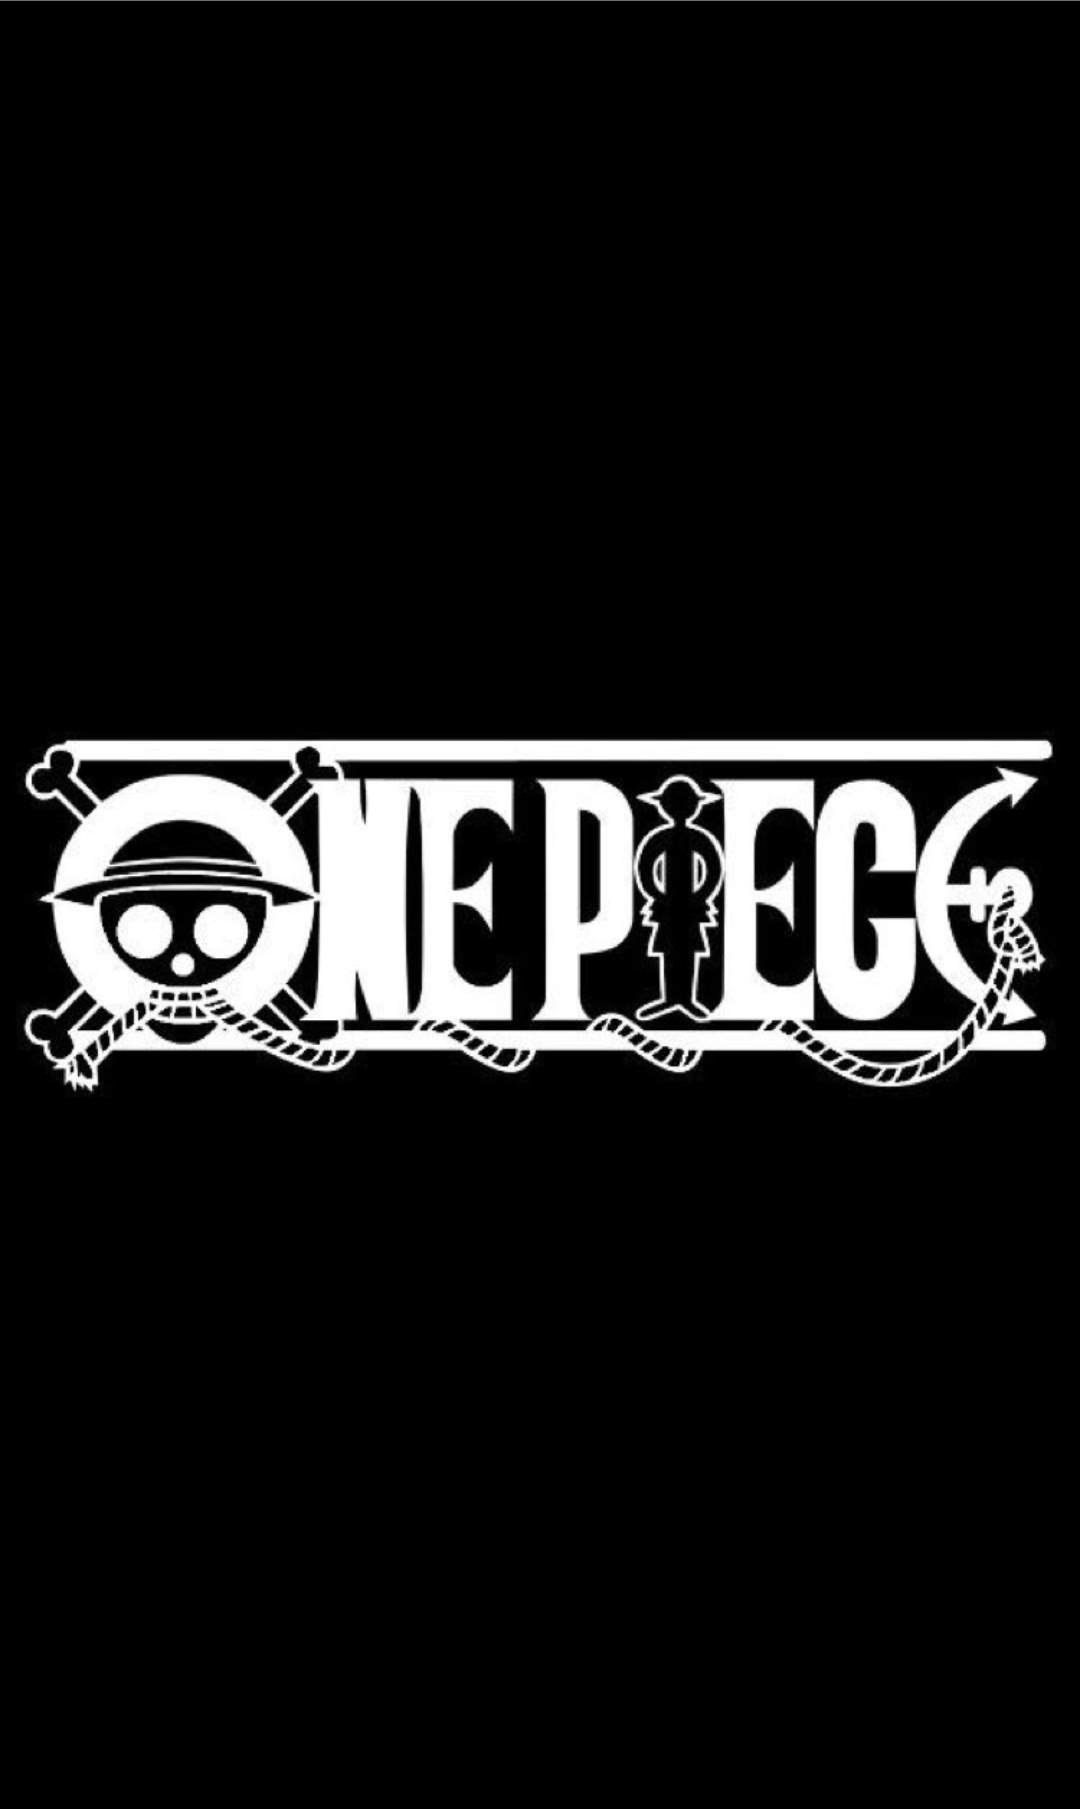 One Piece. One piece logo, One piece wallpaper iphone, One piece drawing